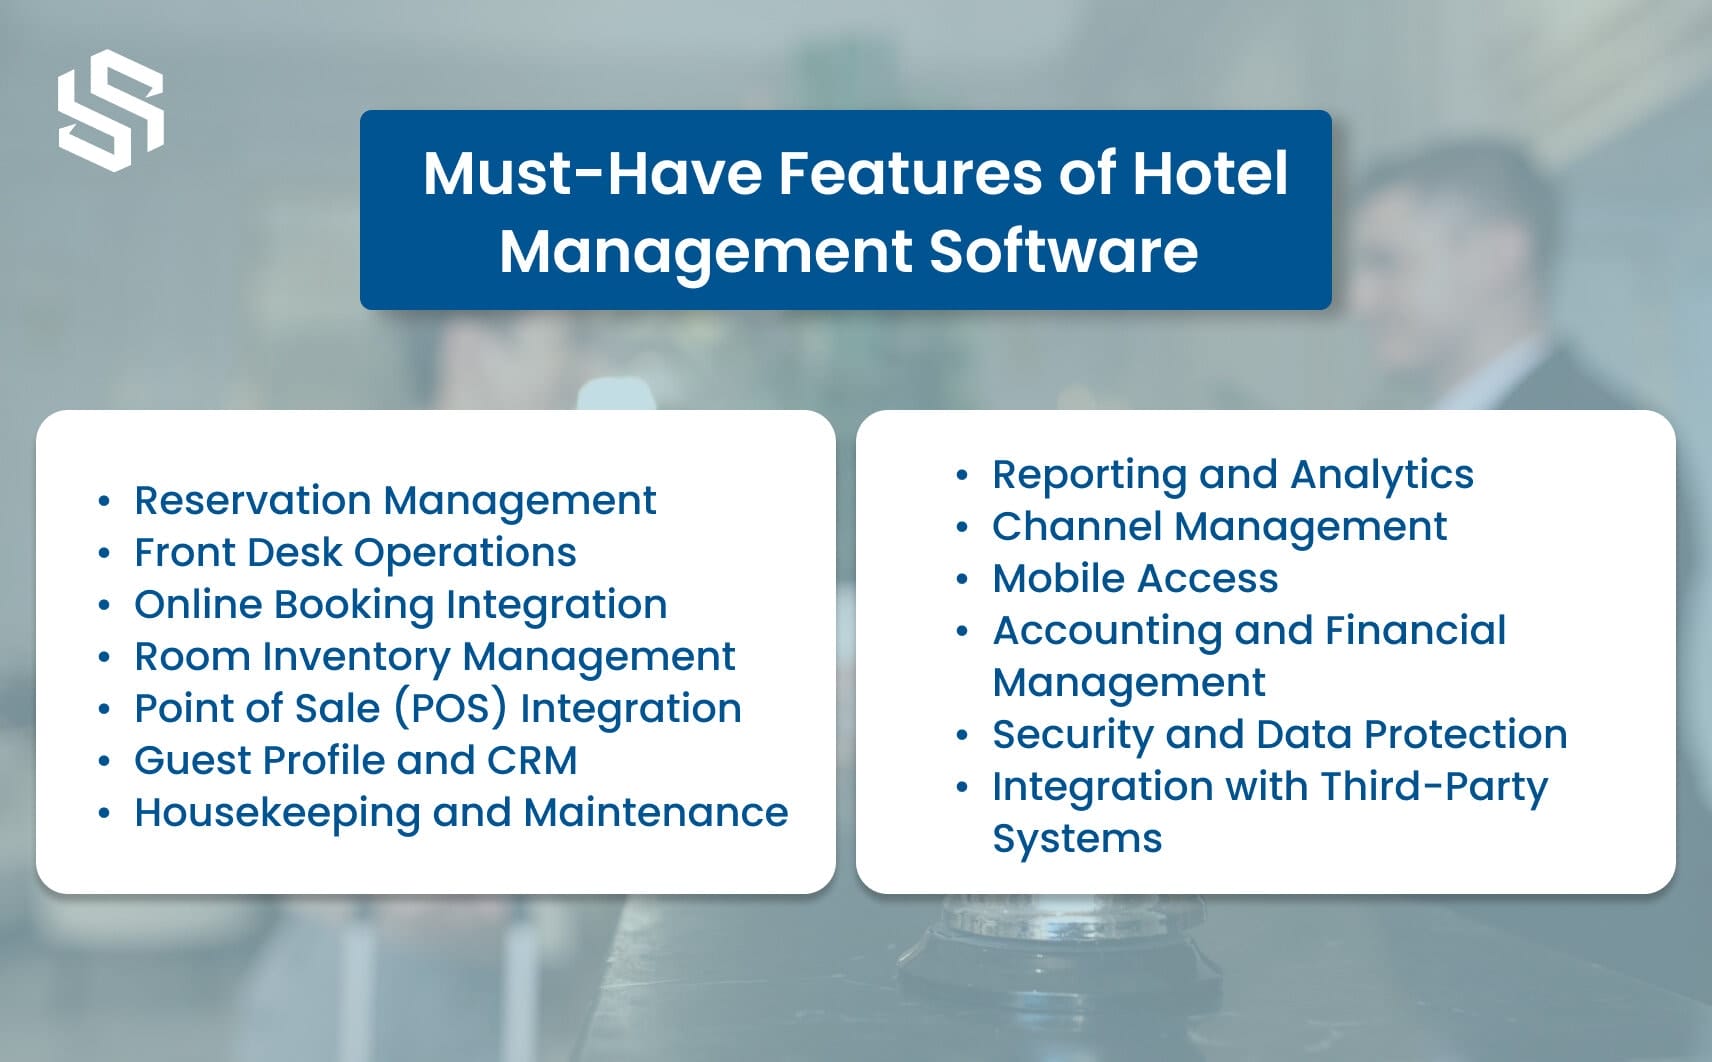 Must-Have Features of Hotel Management Software